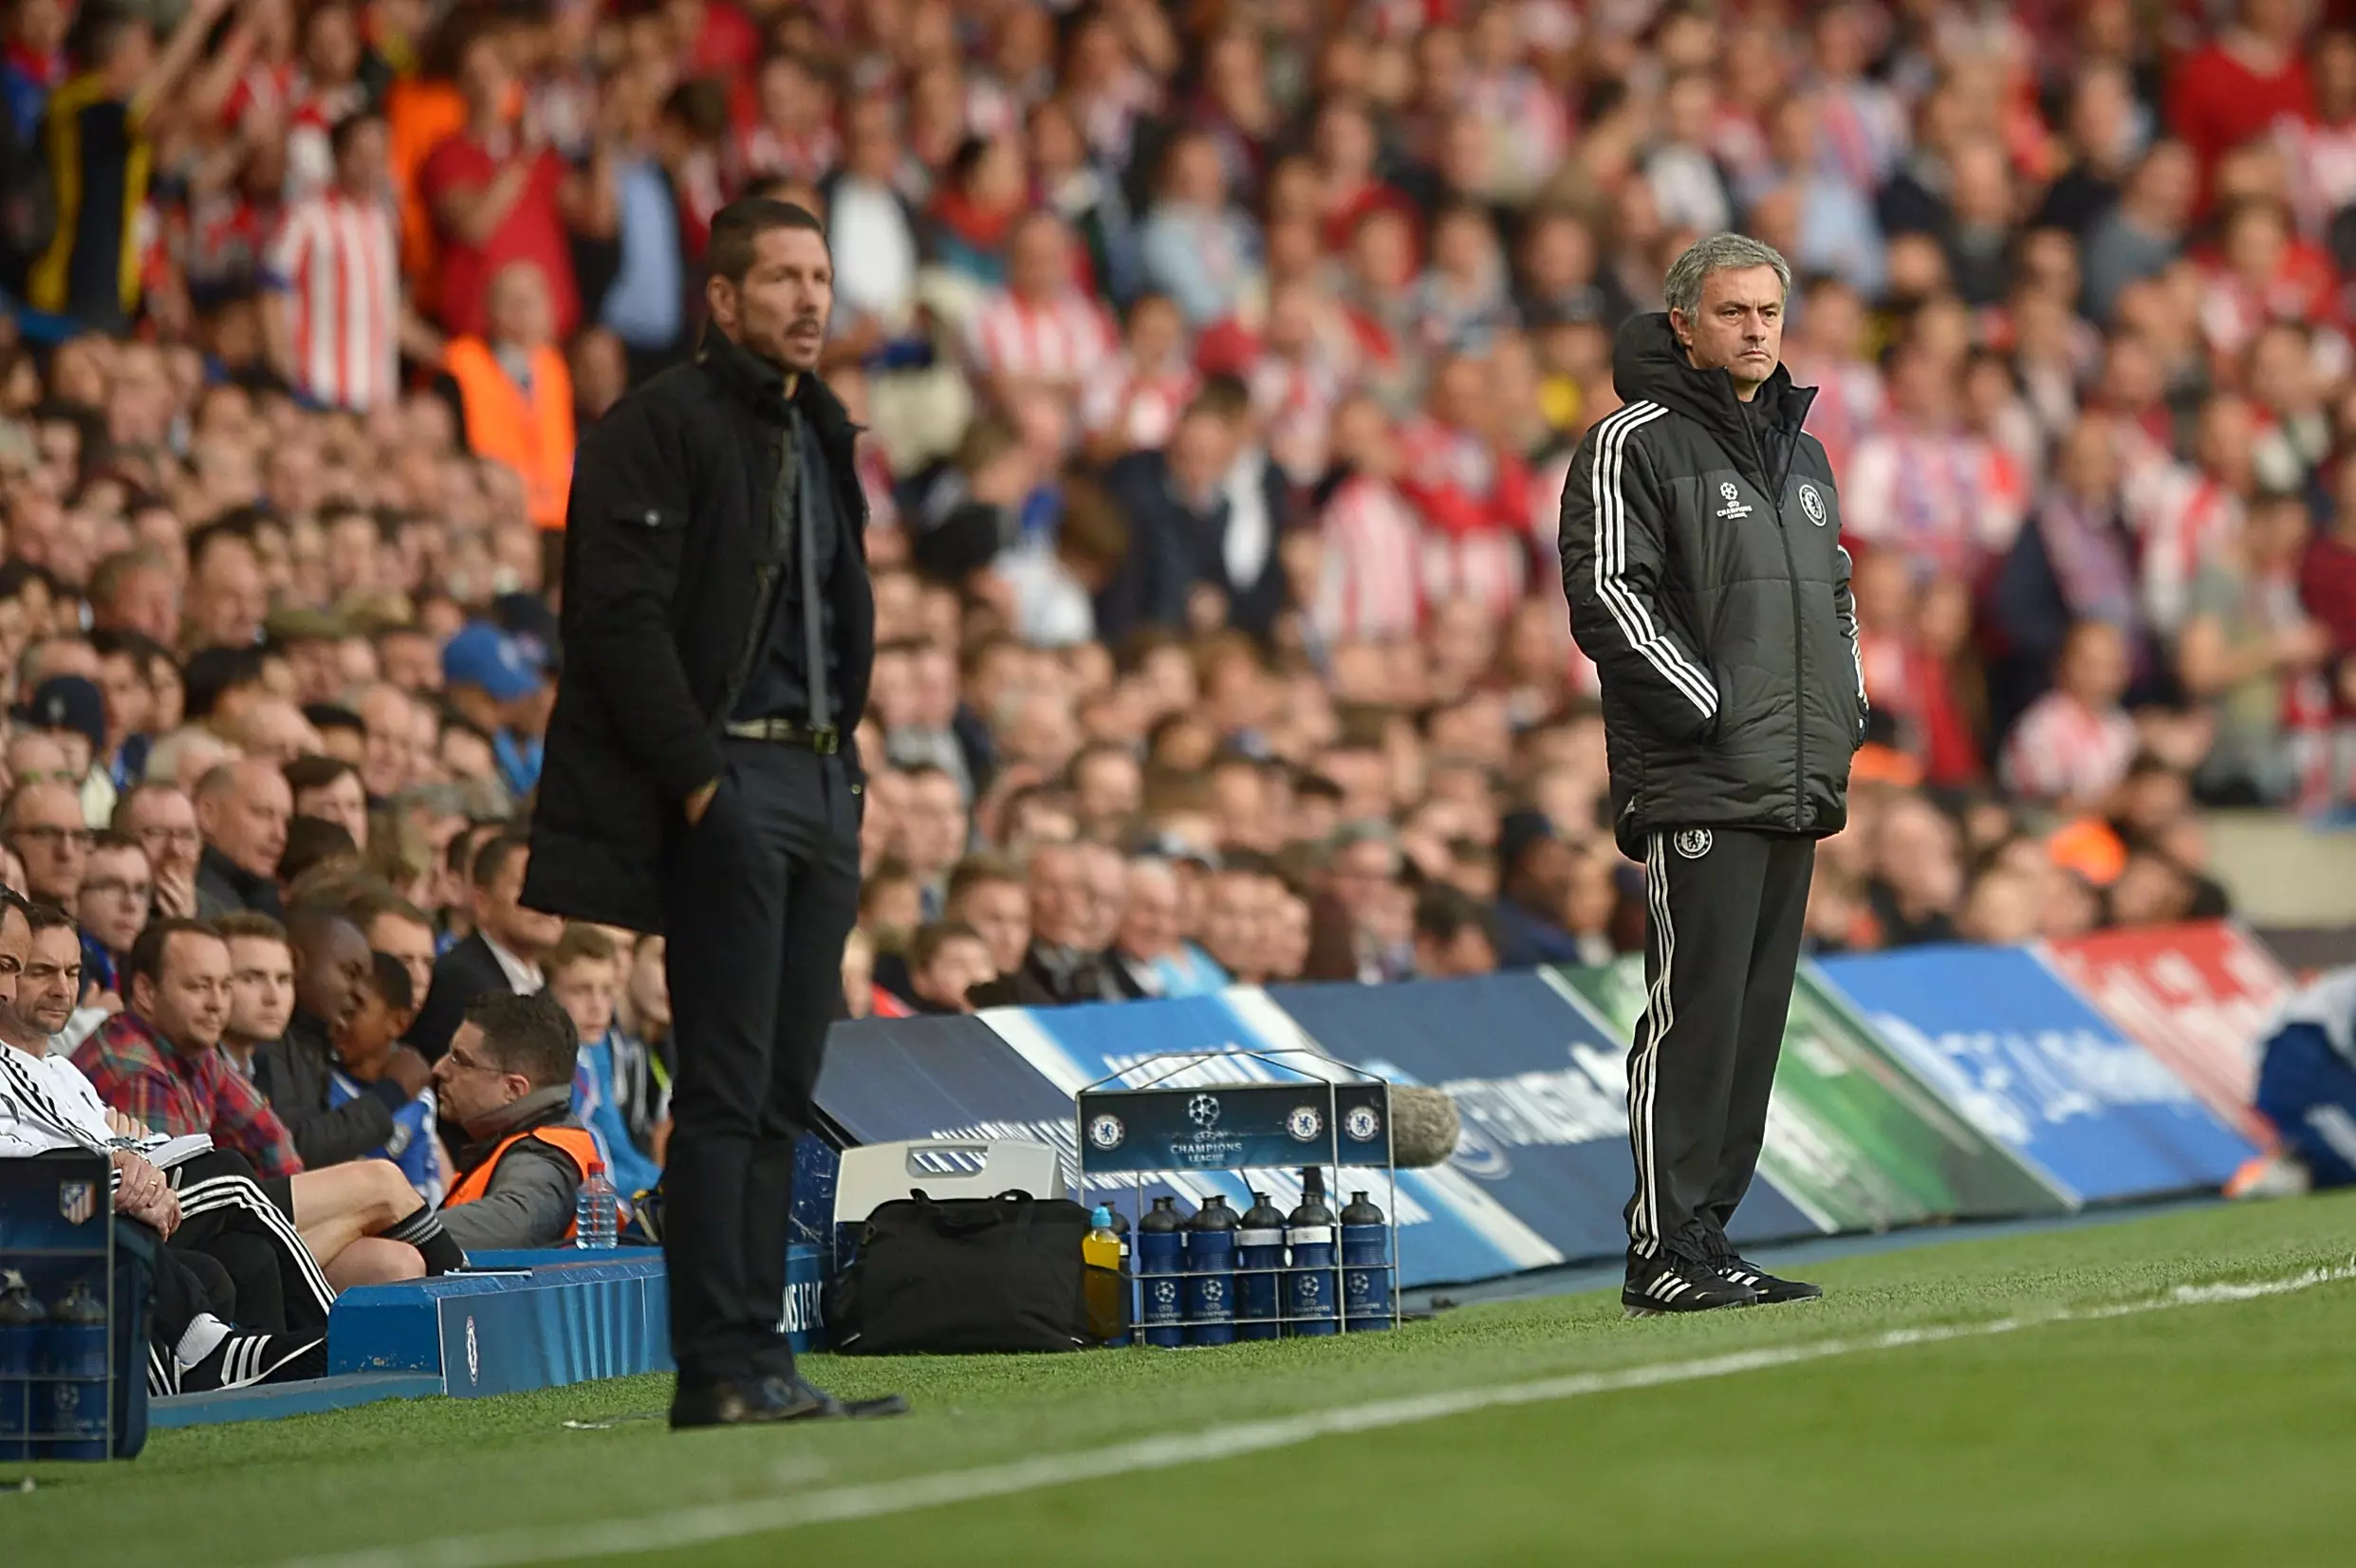 Could Simeone replace Mourinho at Old Trafford? Image: PA Images.